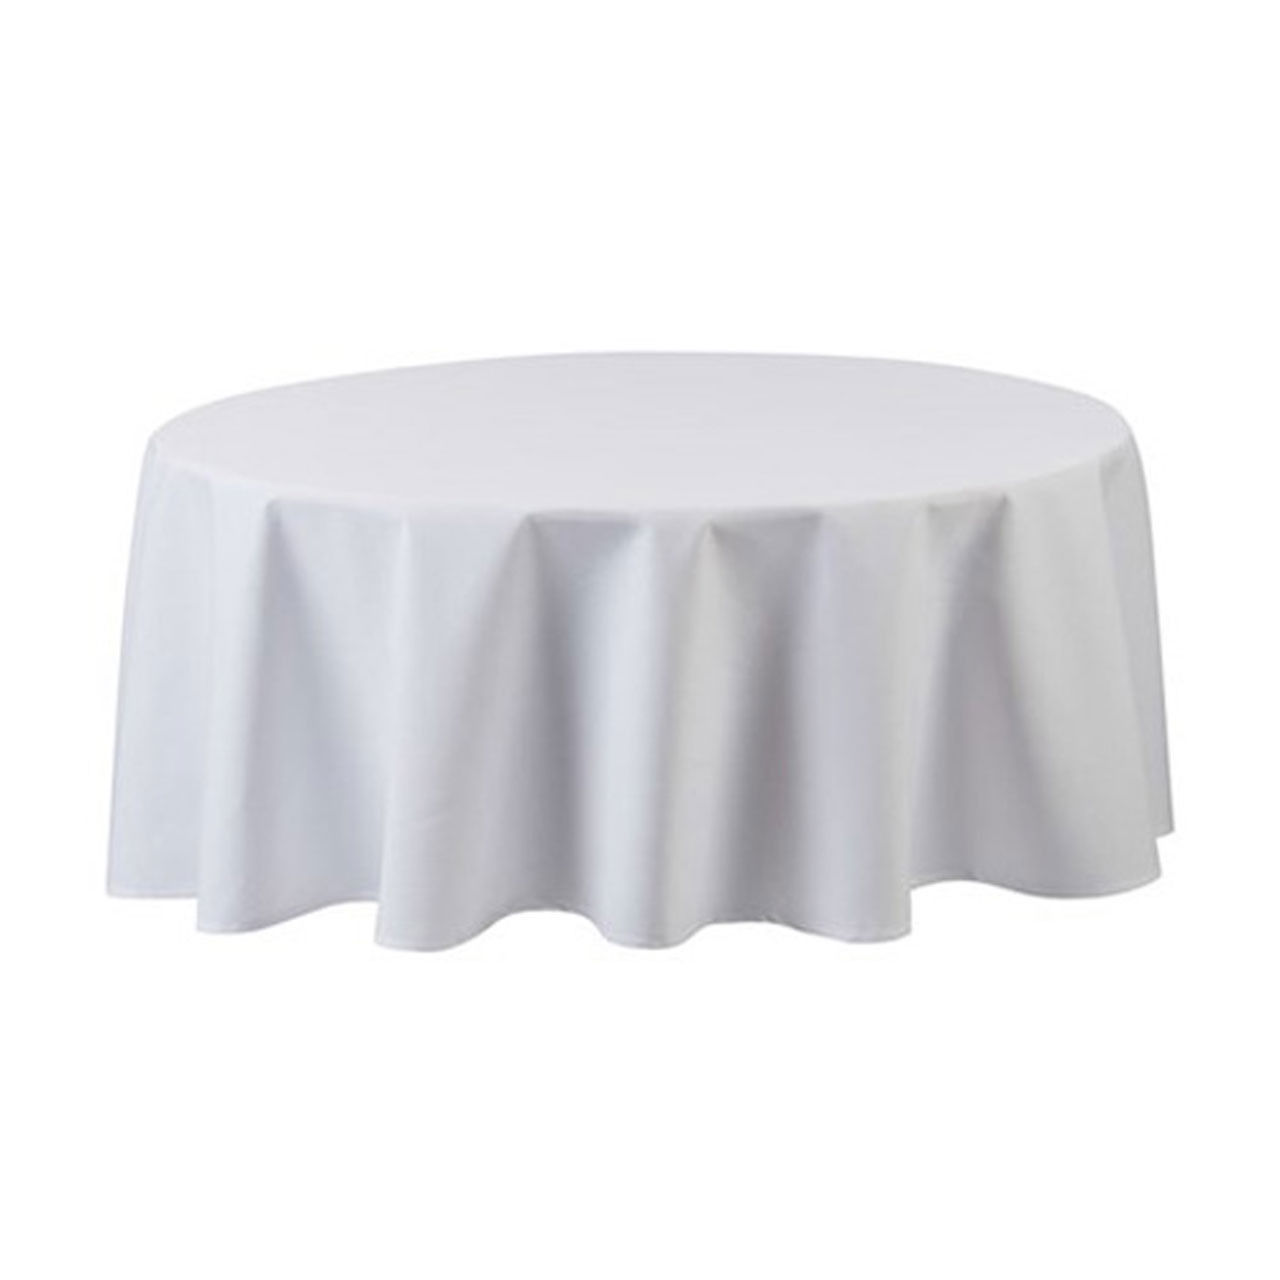 Where can I find the 120 round tablecloth in stock?